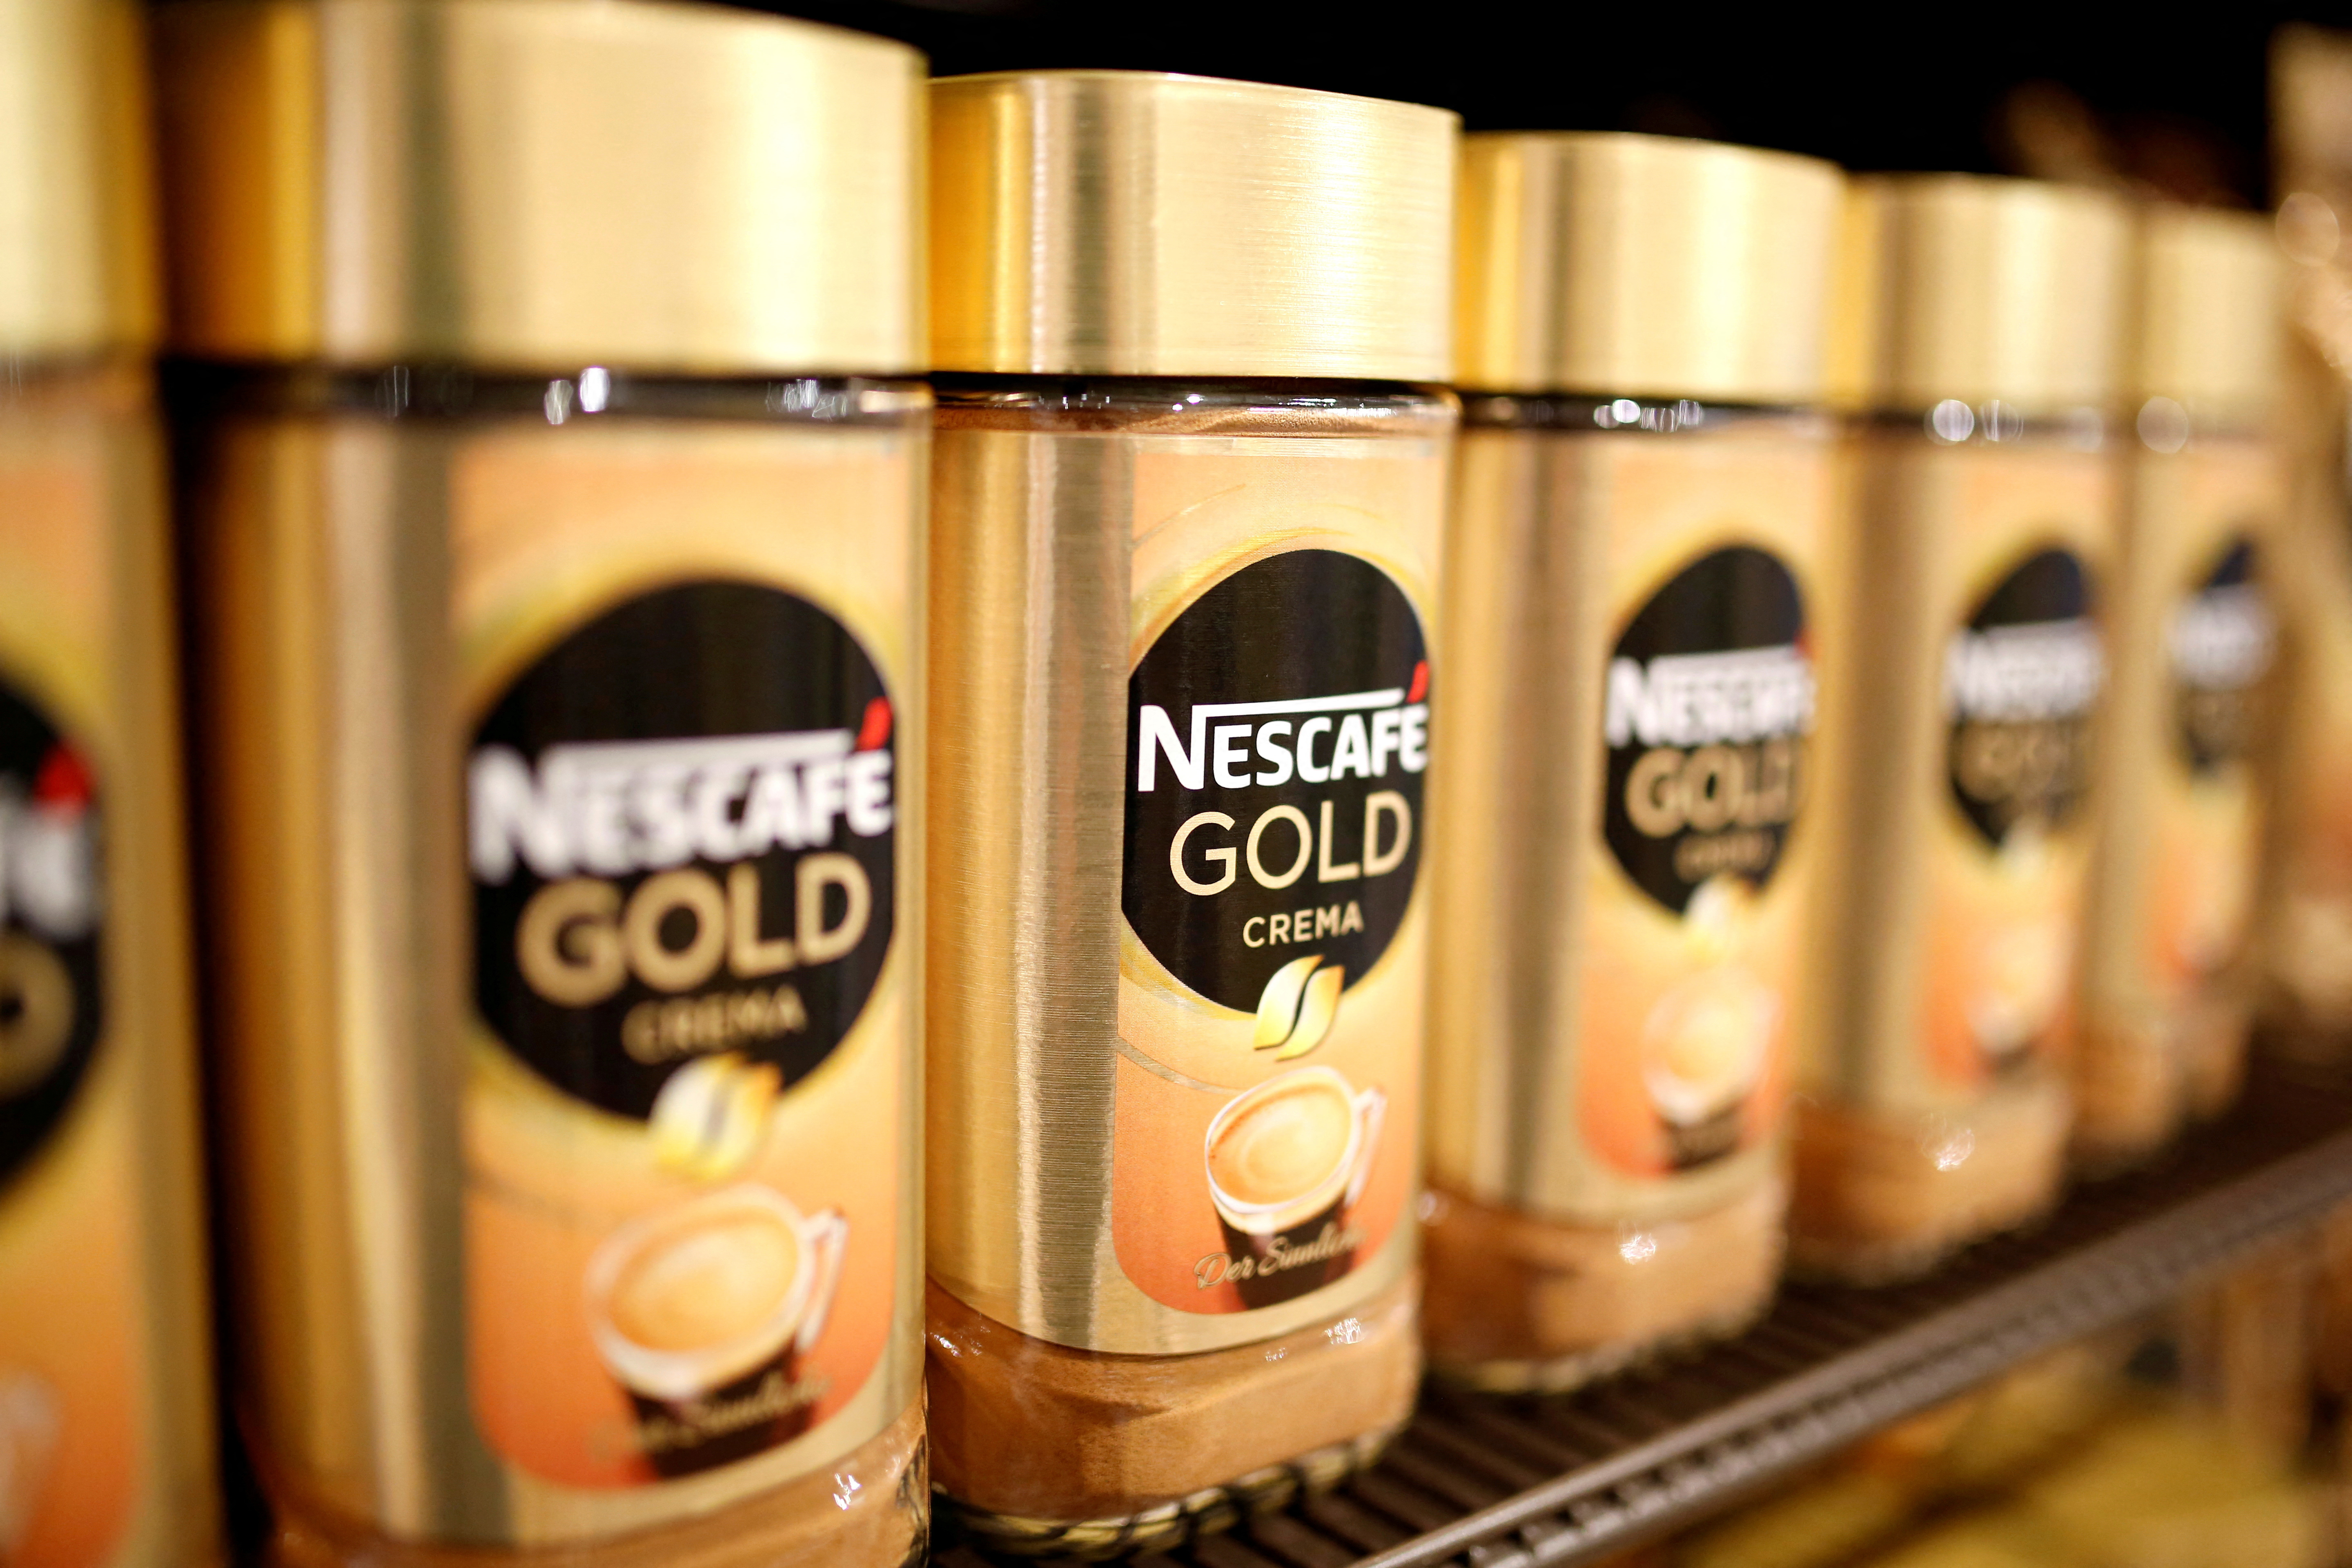 Jars of Nescafe Gold Coffee by Nestle are pictured in a supermarket at Nestle's headquarters in Vevey